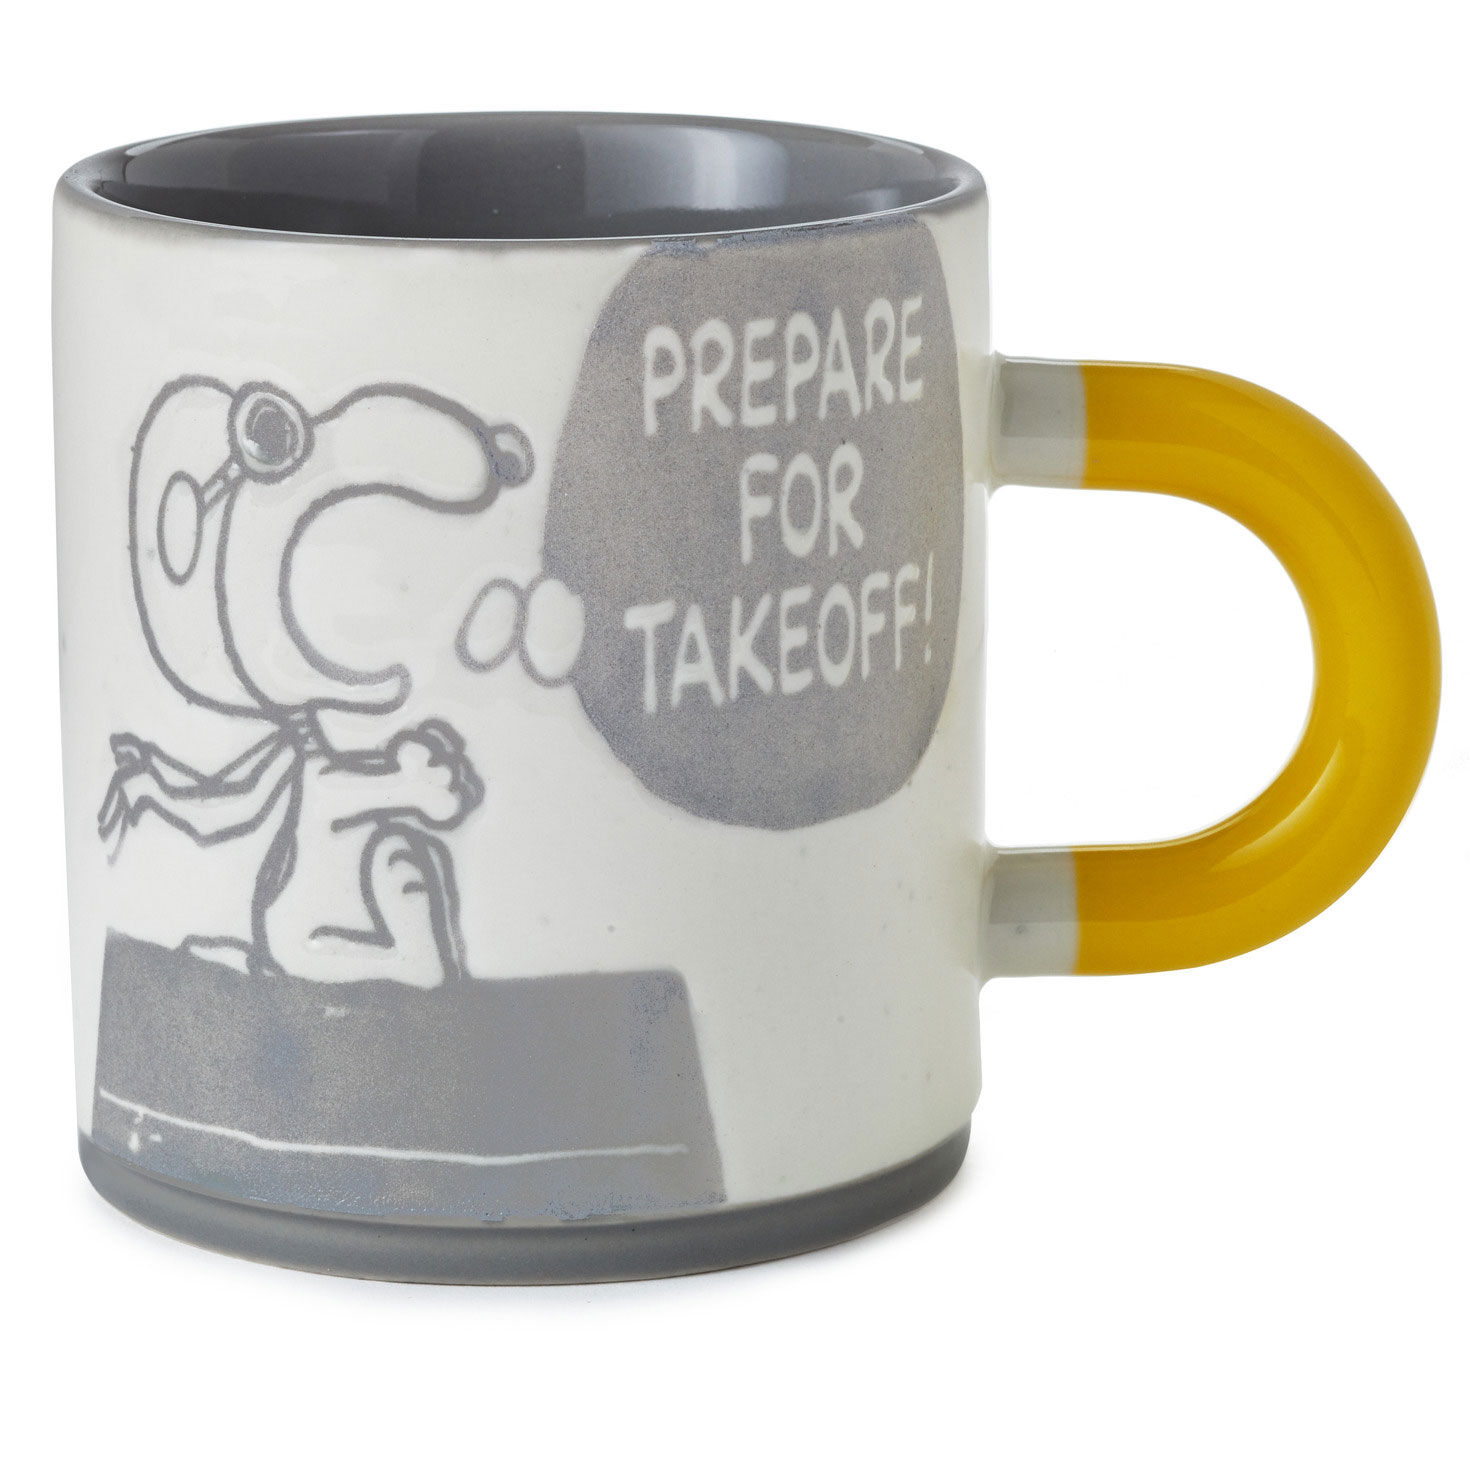 https://www.hallmark.com/dw/image/v2/AALB_PRD/on/demandware.static/-/Sites-hallmark-master/default/dw8e40df30/images/finished-goods/products/1PAJ3524/Snoopy-and-Woodstock-White-and-Gray-Flying-Ace-Mug_1PAJ3524_01.jpg?sfrm=jpg